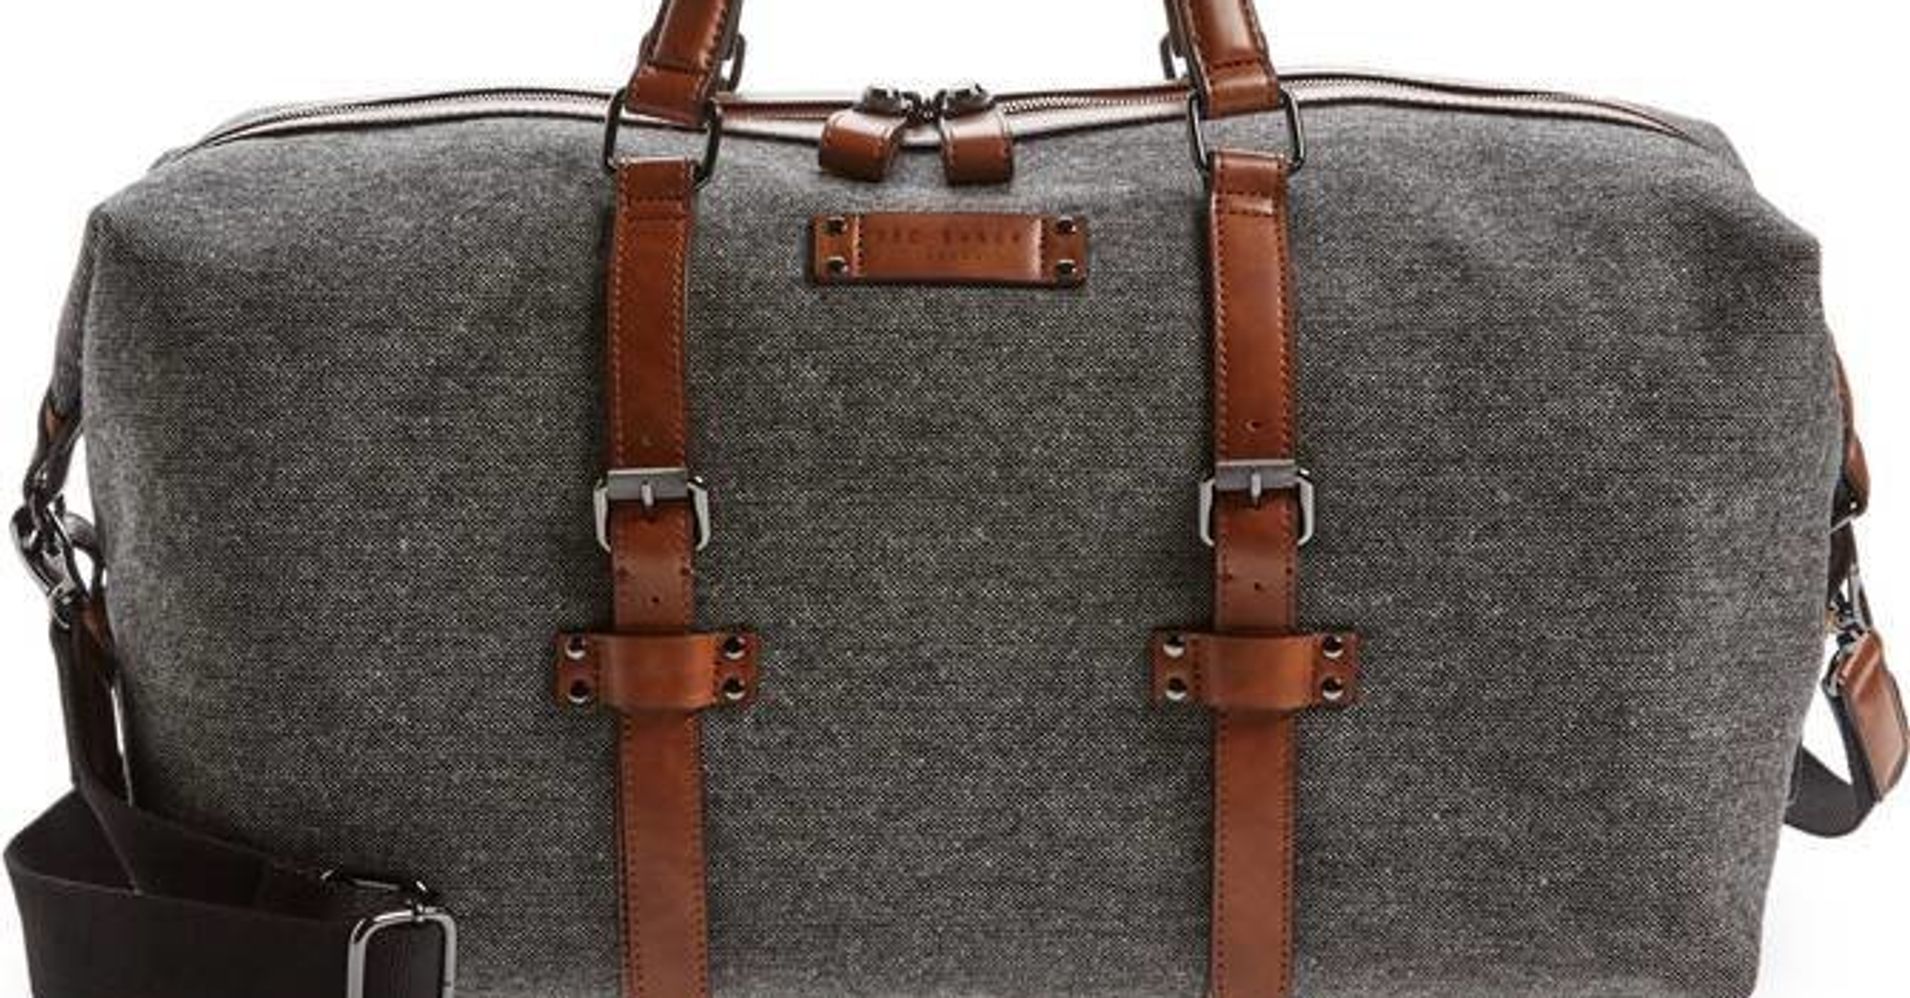 13 Of The Best Men's Duffel Bags For Your Weekend Travels | HuffPost